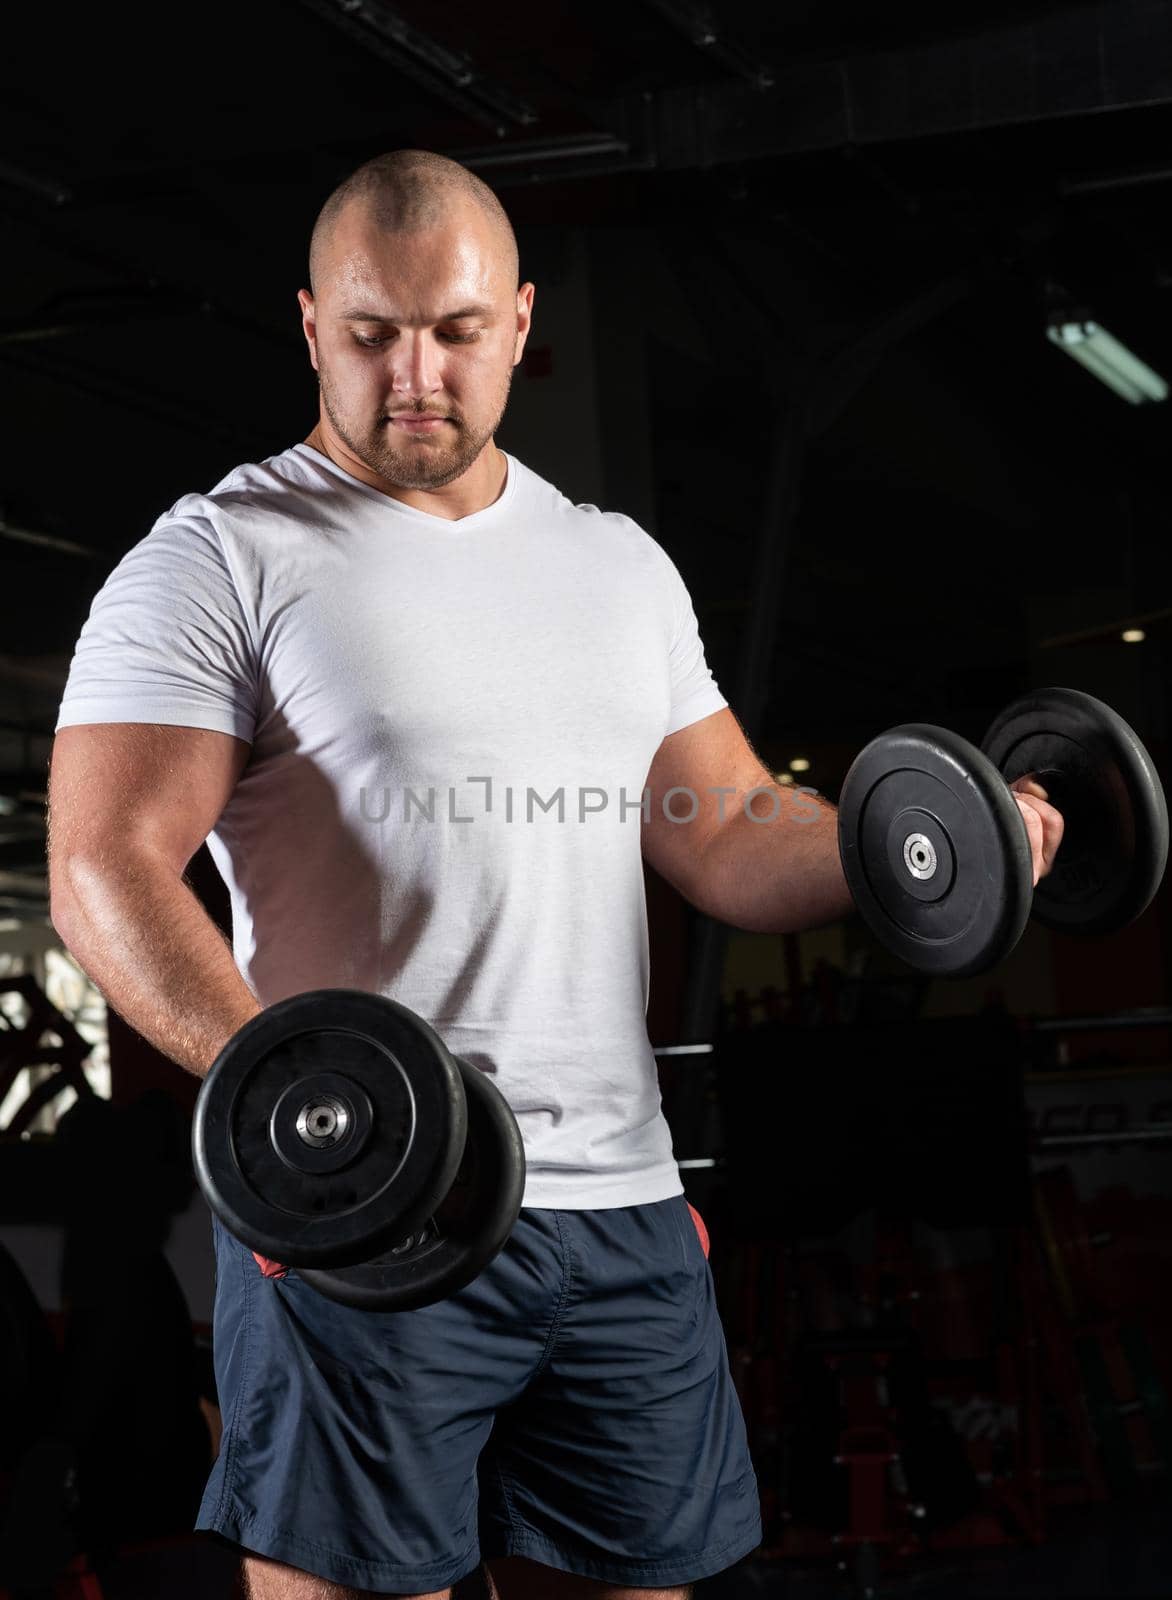 Male bodybuilder engaged with dumbbells in the gym. Healthy lifestyle